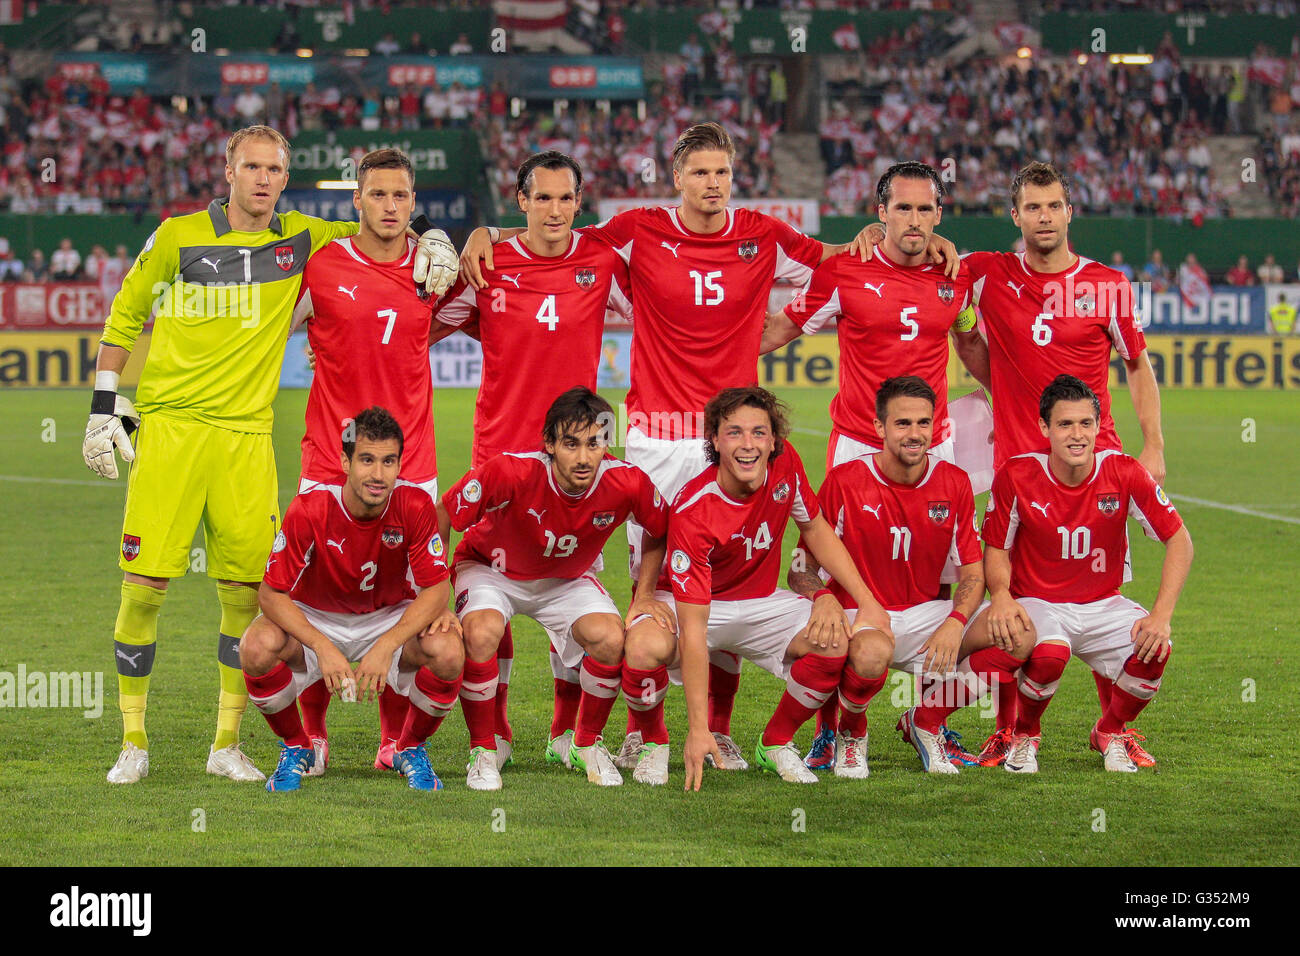 The Austrian team during the national anthem before the WC qualifier soccer game on September 11, 2012 in Vienna, Austria Stock Photo